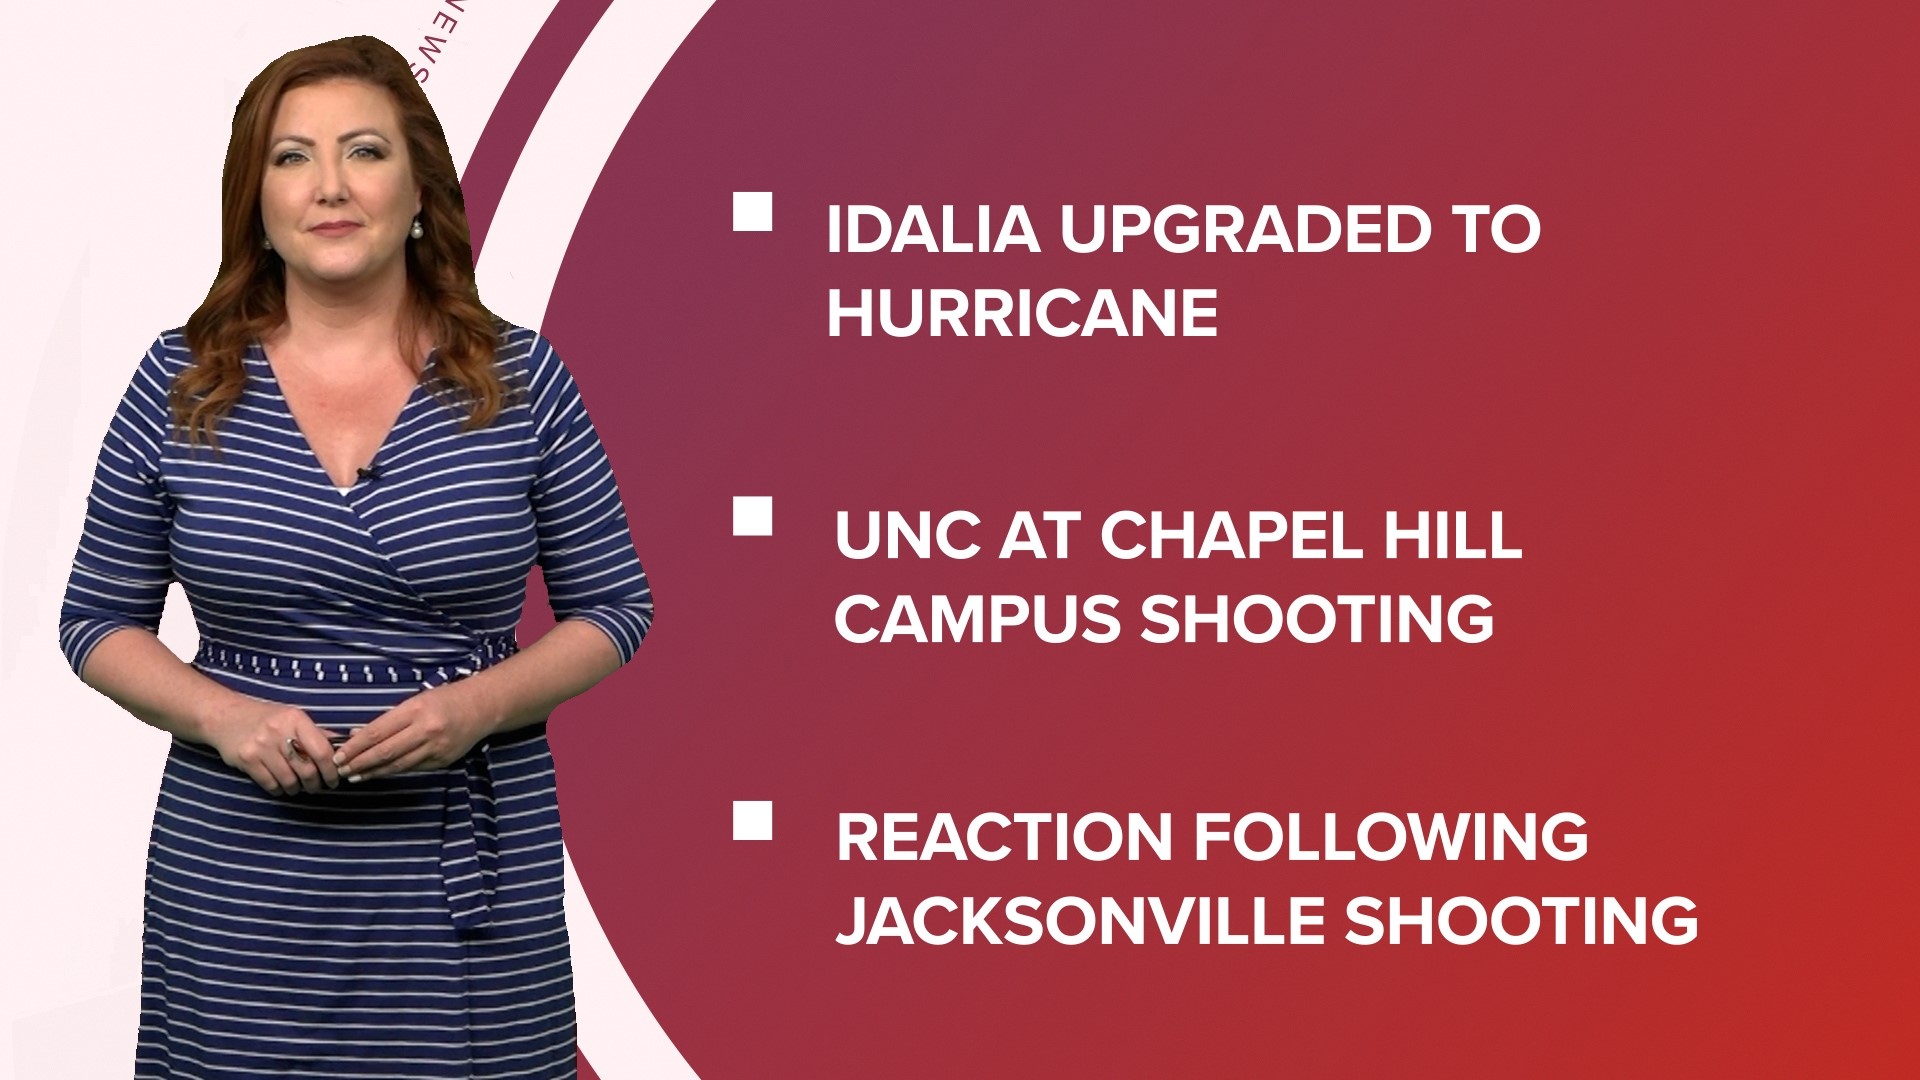 A look at what is happening in the news from Hurricane Idalia predicted to hit Florida on Wednesday to the victims identified in the Jacksonville shooting.